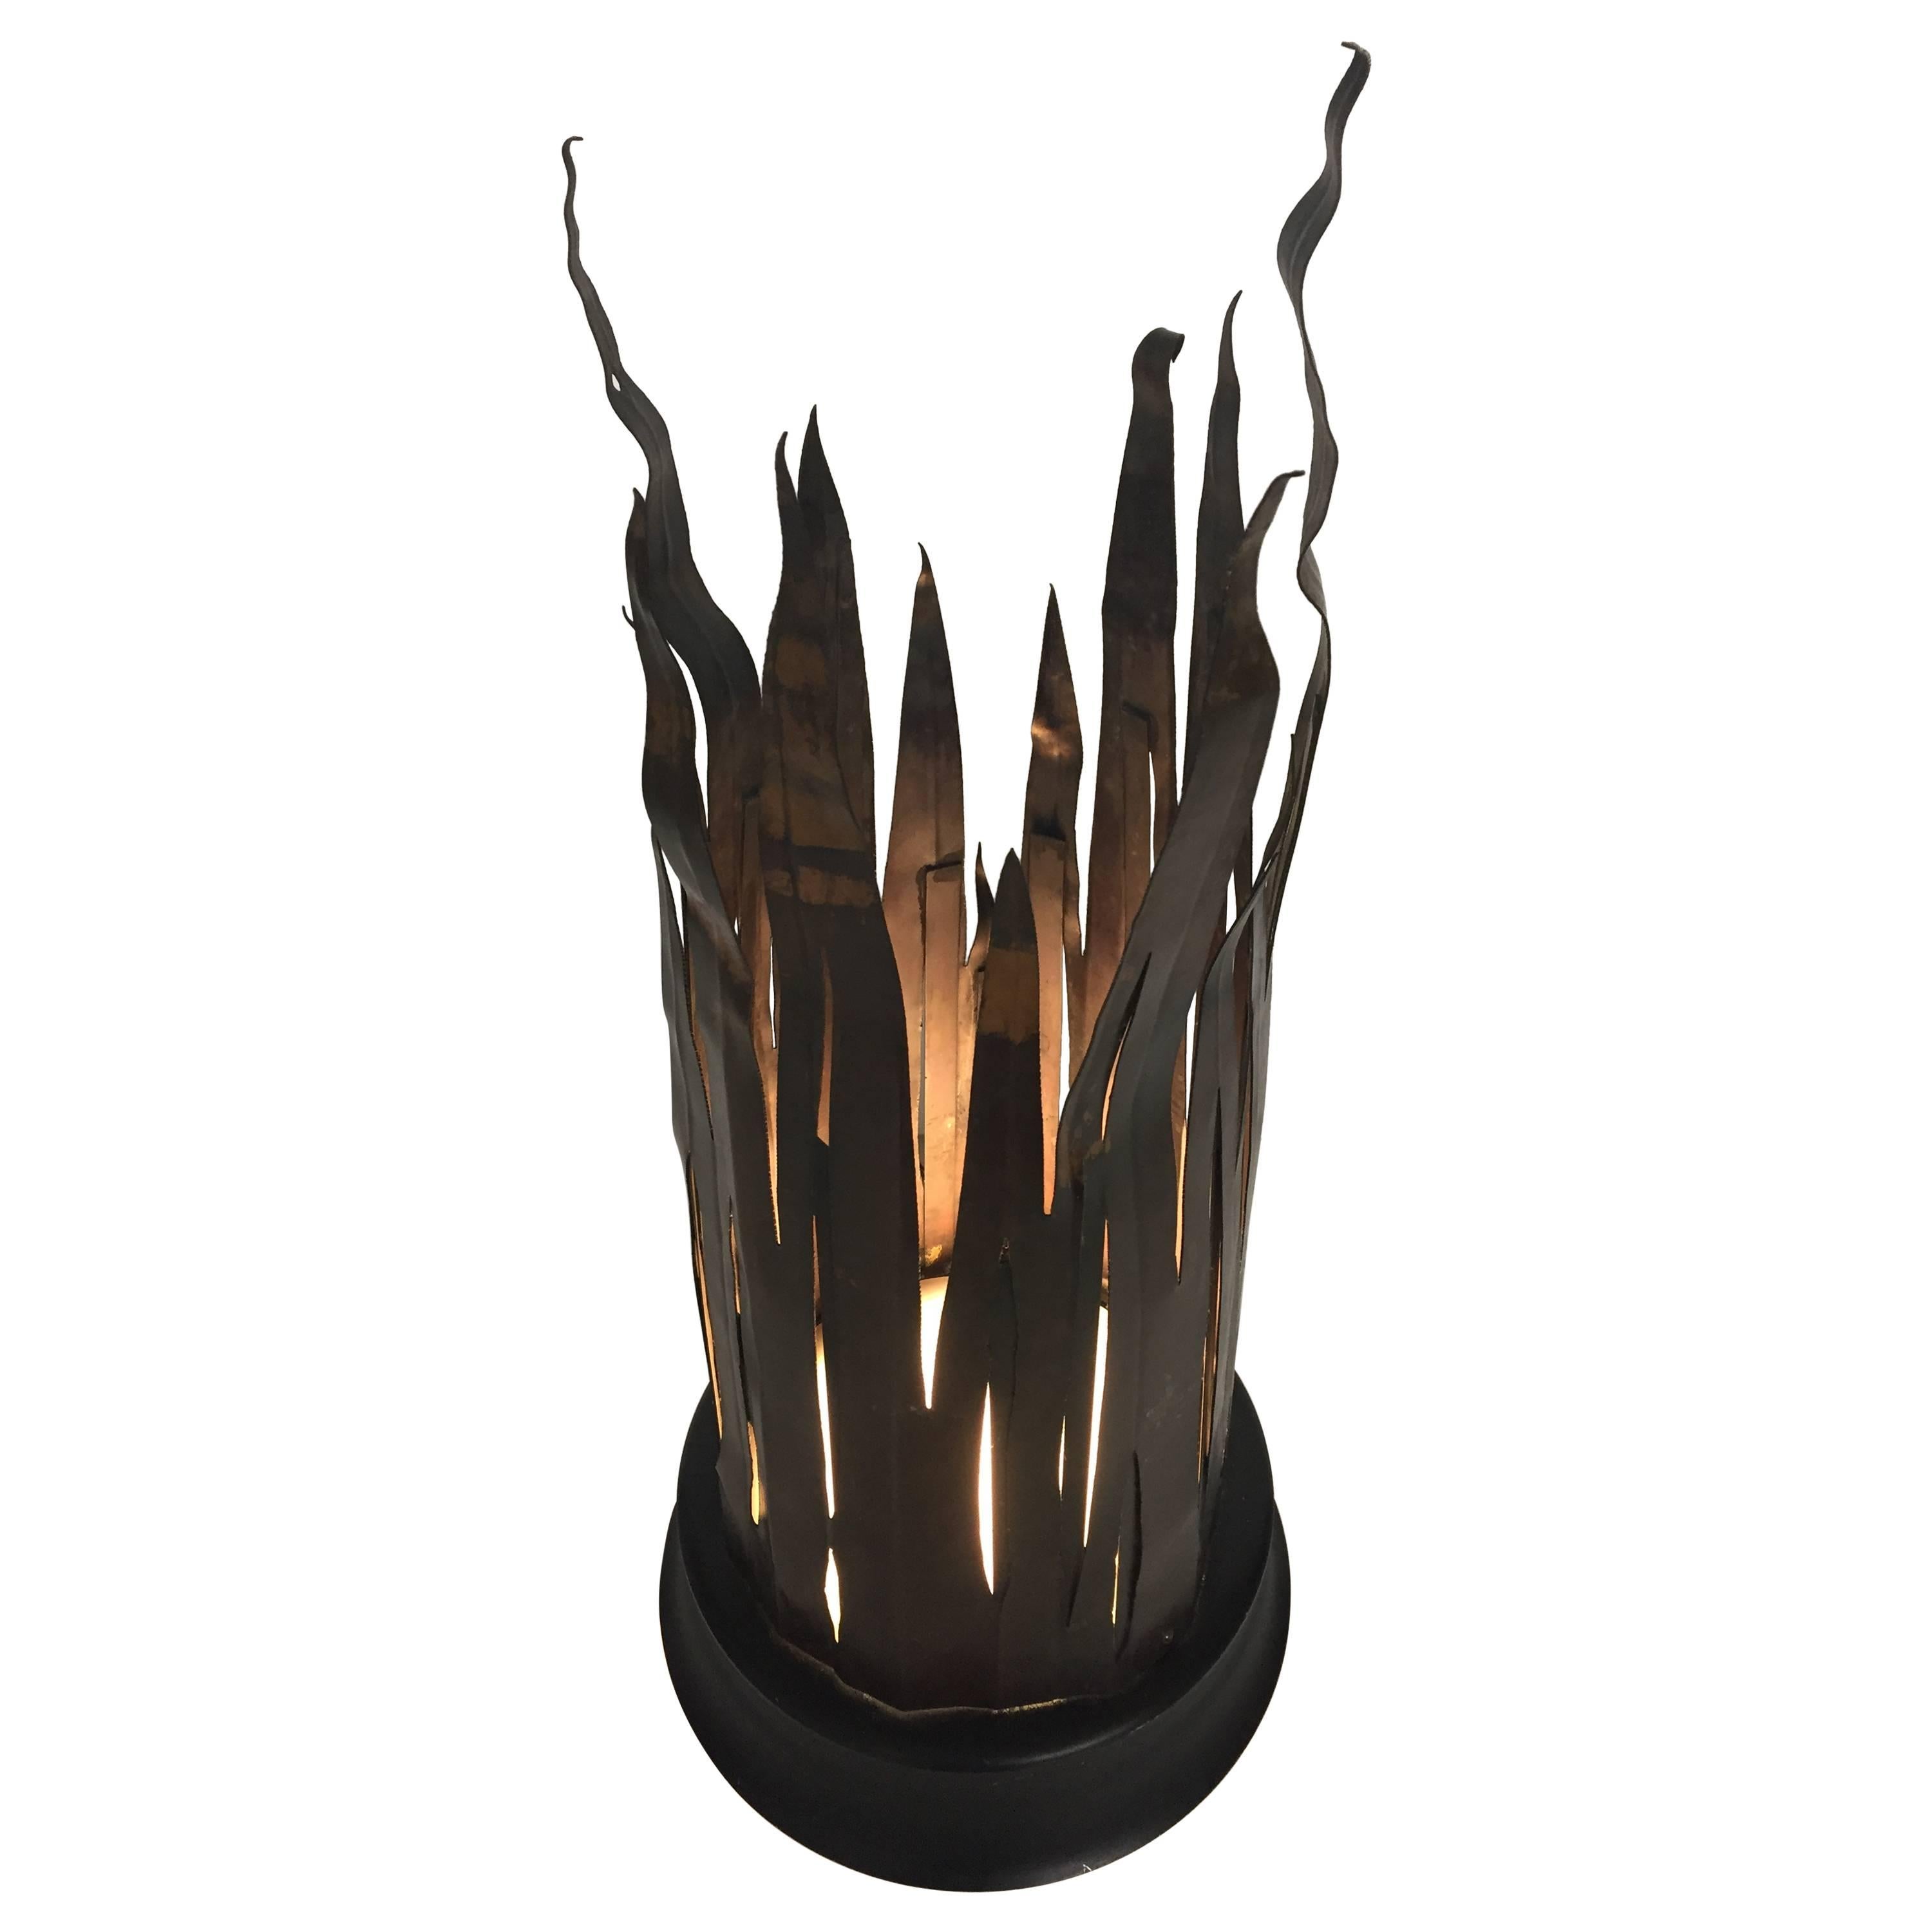 Sculptural Artisan Crafted Brutalist Copper Table Lamp